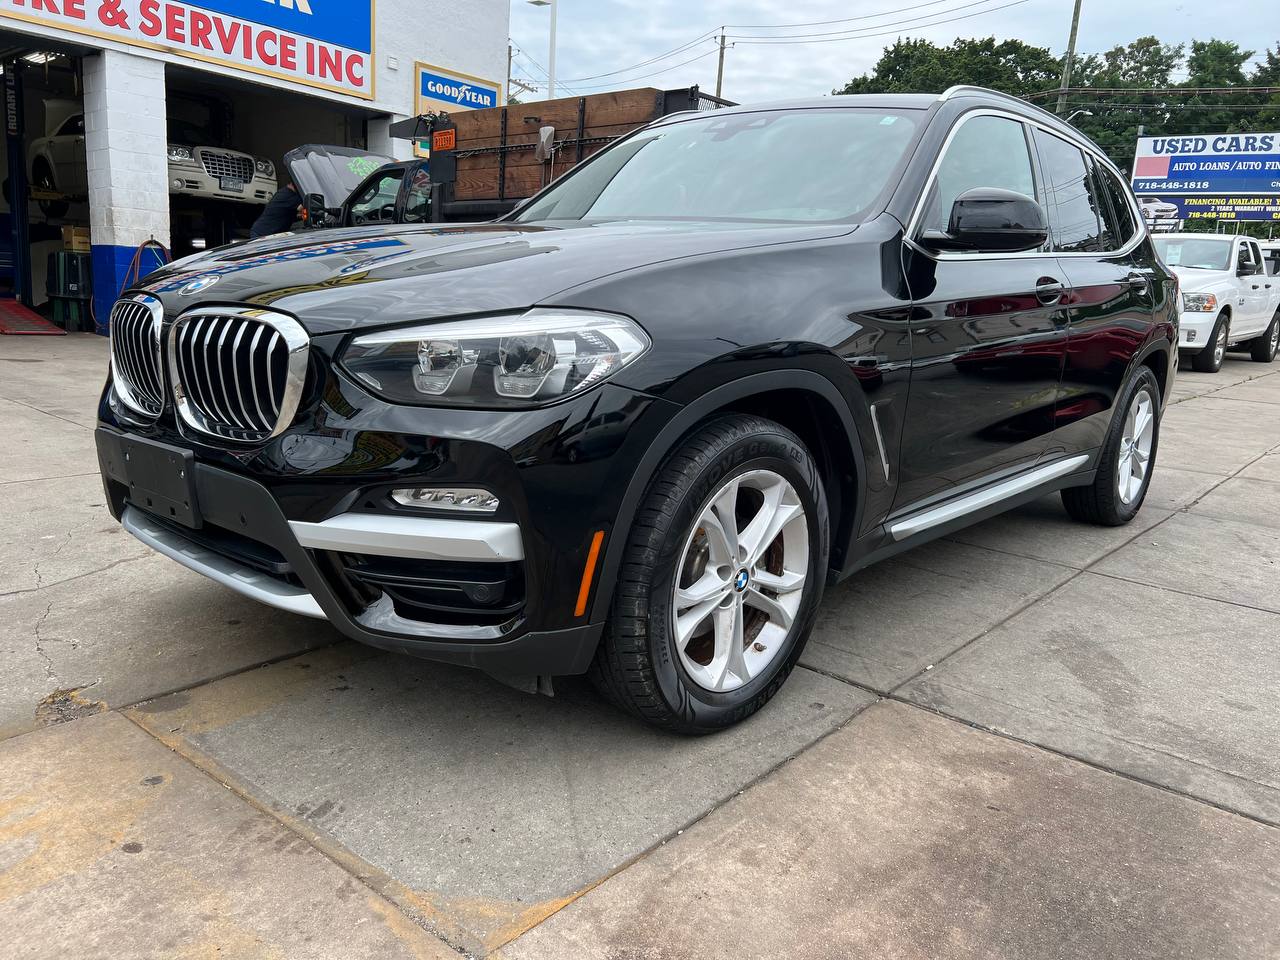 Used Car - 2019 BMW X3 sDrive30i for Sale in Staten Island, NY